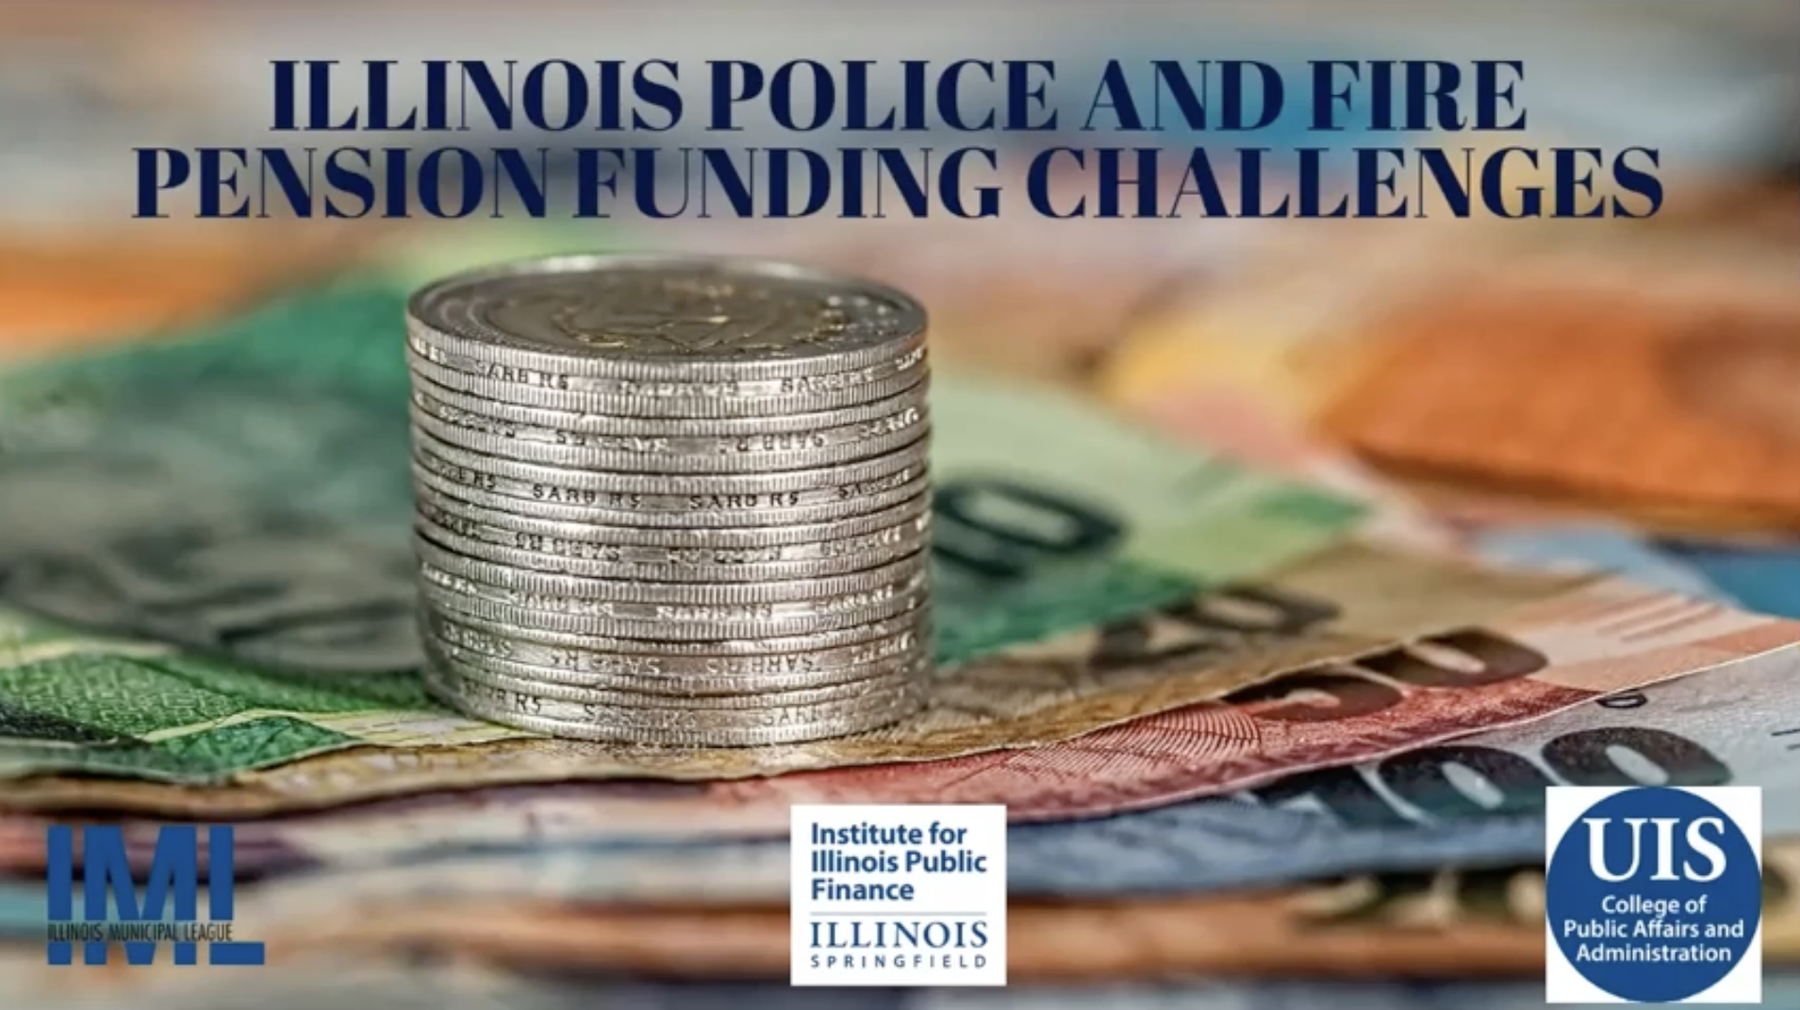 Illinois Police and Fire Pension Funding Challenges by the Illinois Municipal League, UIS Institute for Illinois Public Finance, and UIS College of Public Affairs and Administration